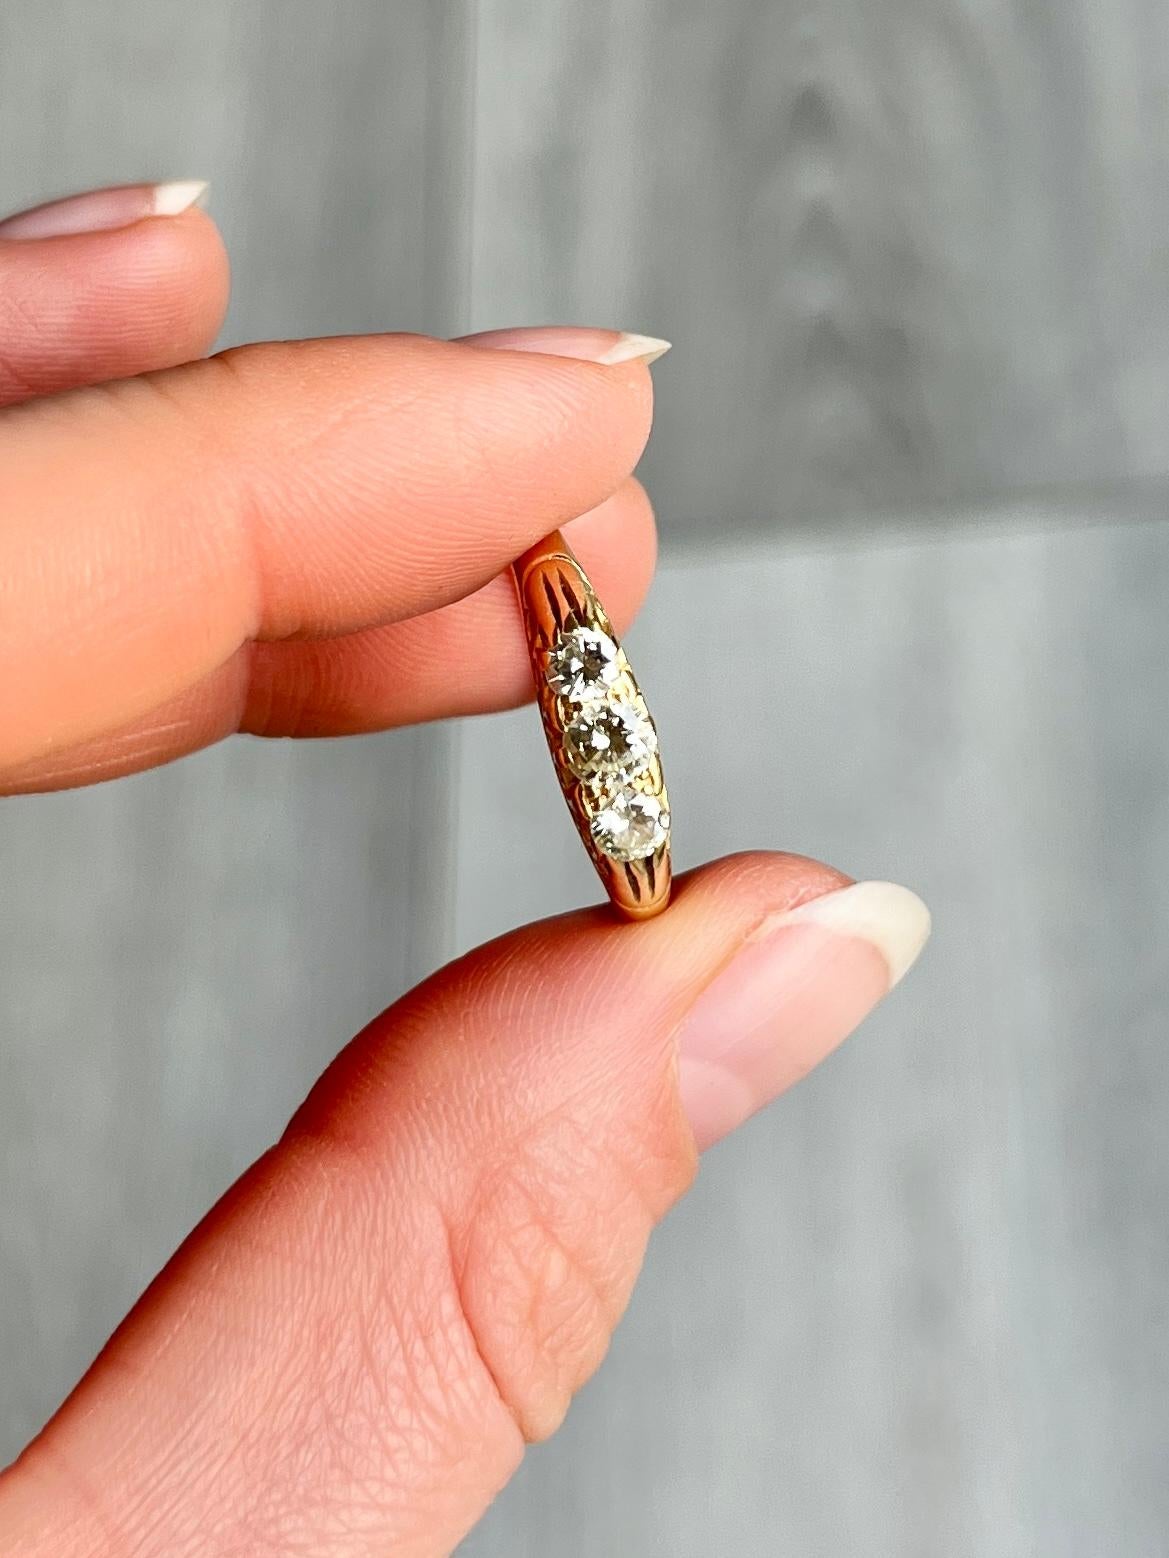 A gorgeous diamond three stone ring modelled in 18carat gold. The central diamond measures 25pts and the stones either side measure 15pts each. 

Ring Size: O or 7 1/4 
Height Off Finger: 4mm

Weight: 4.1g